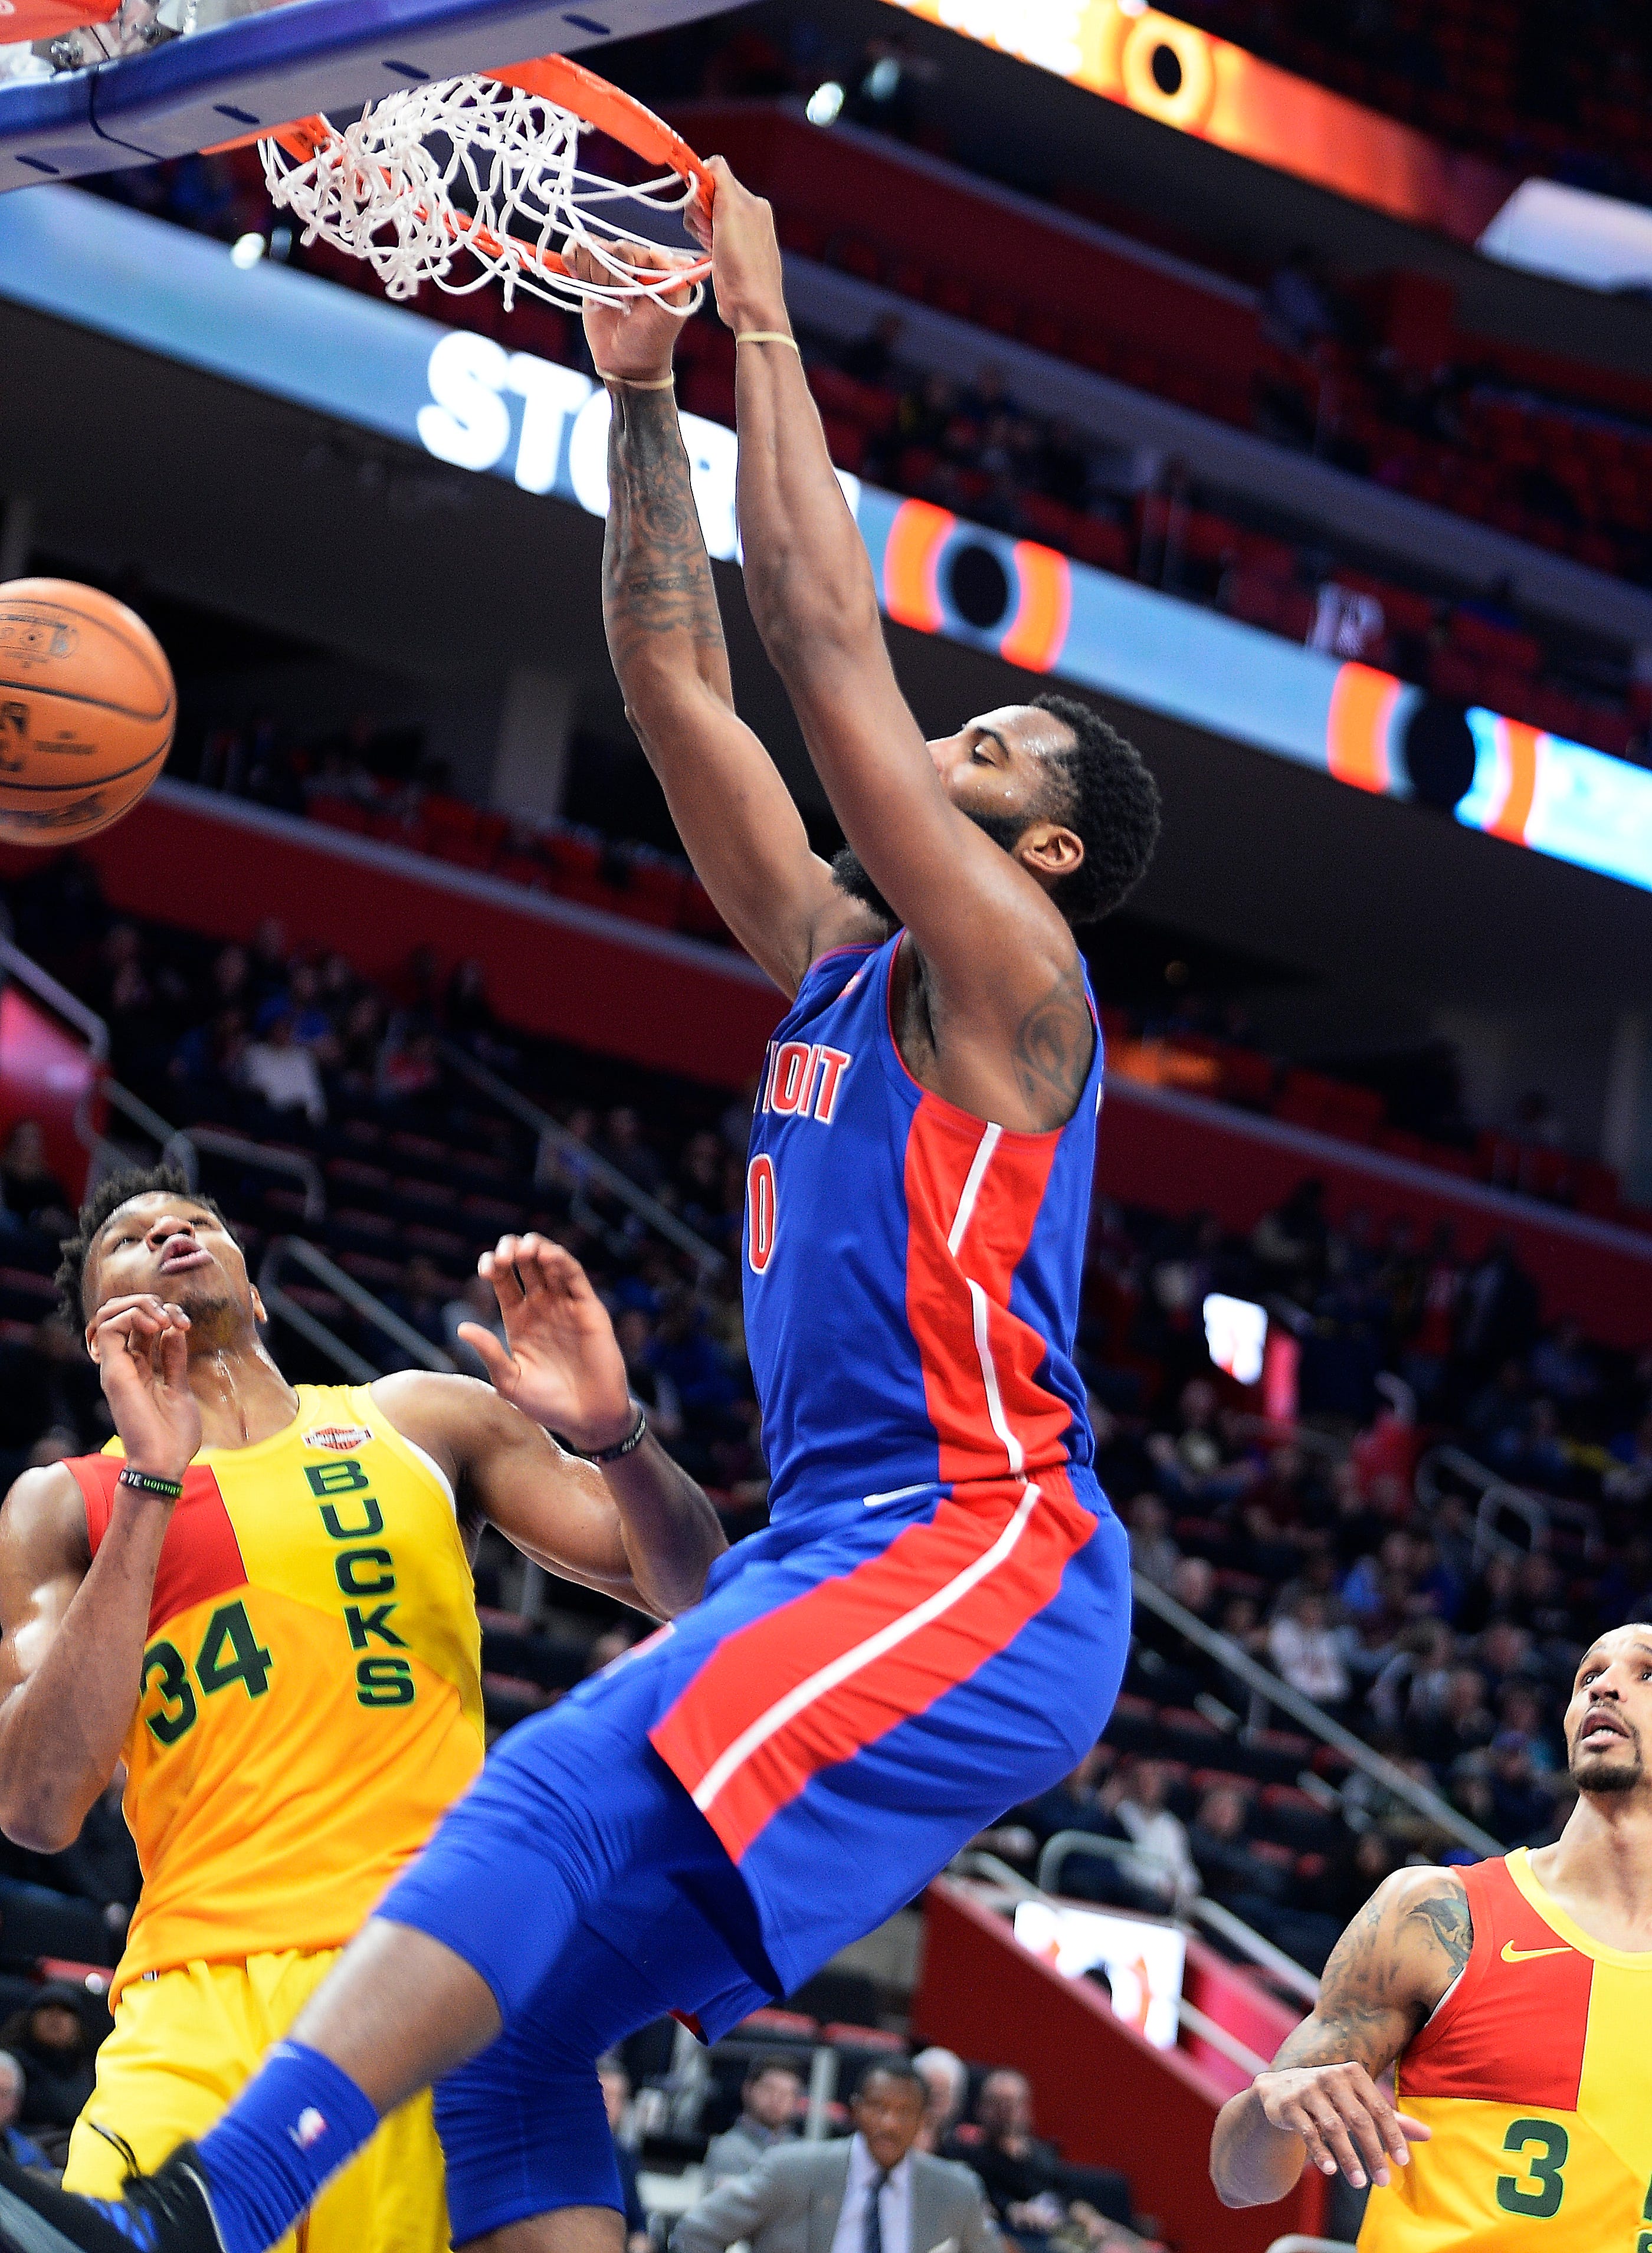 Pistons center Andre Drummond's role in the playoff series against the Bucks becomes even bigger if Blake Griffin remains limited by a knee injury.